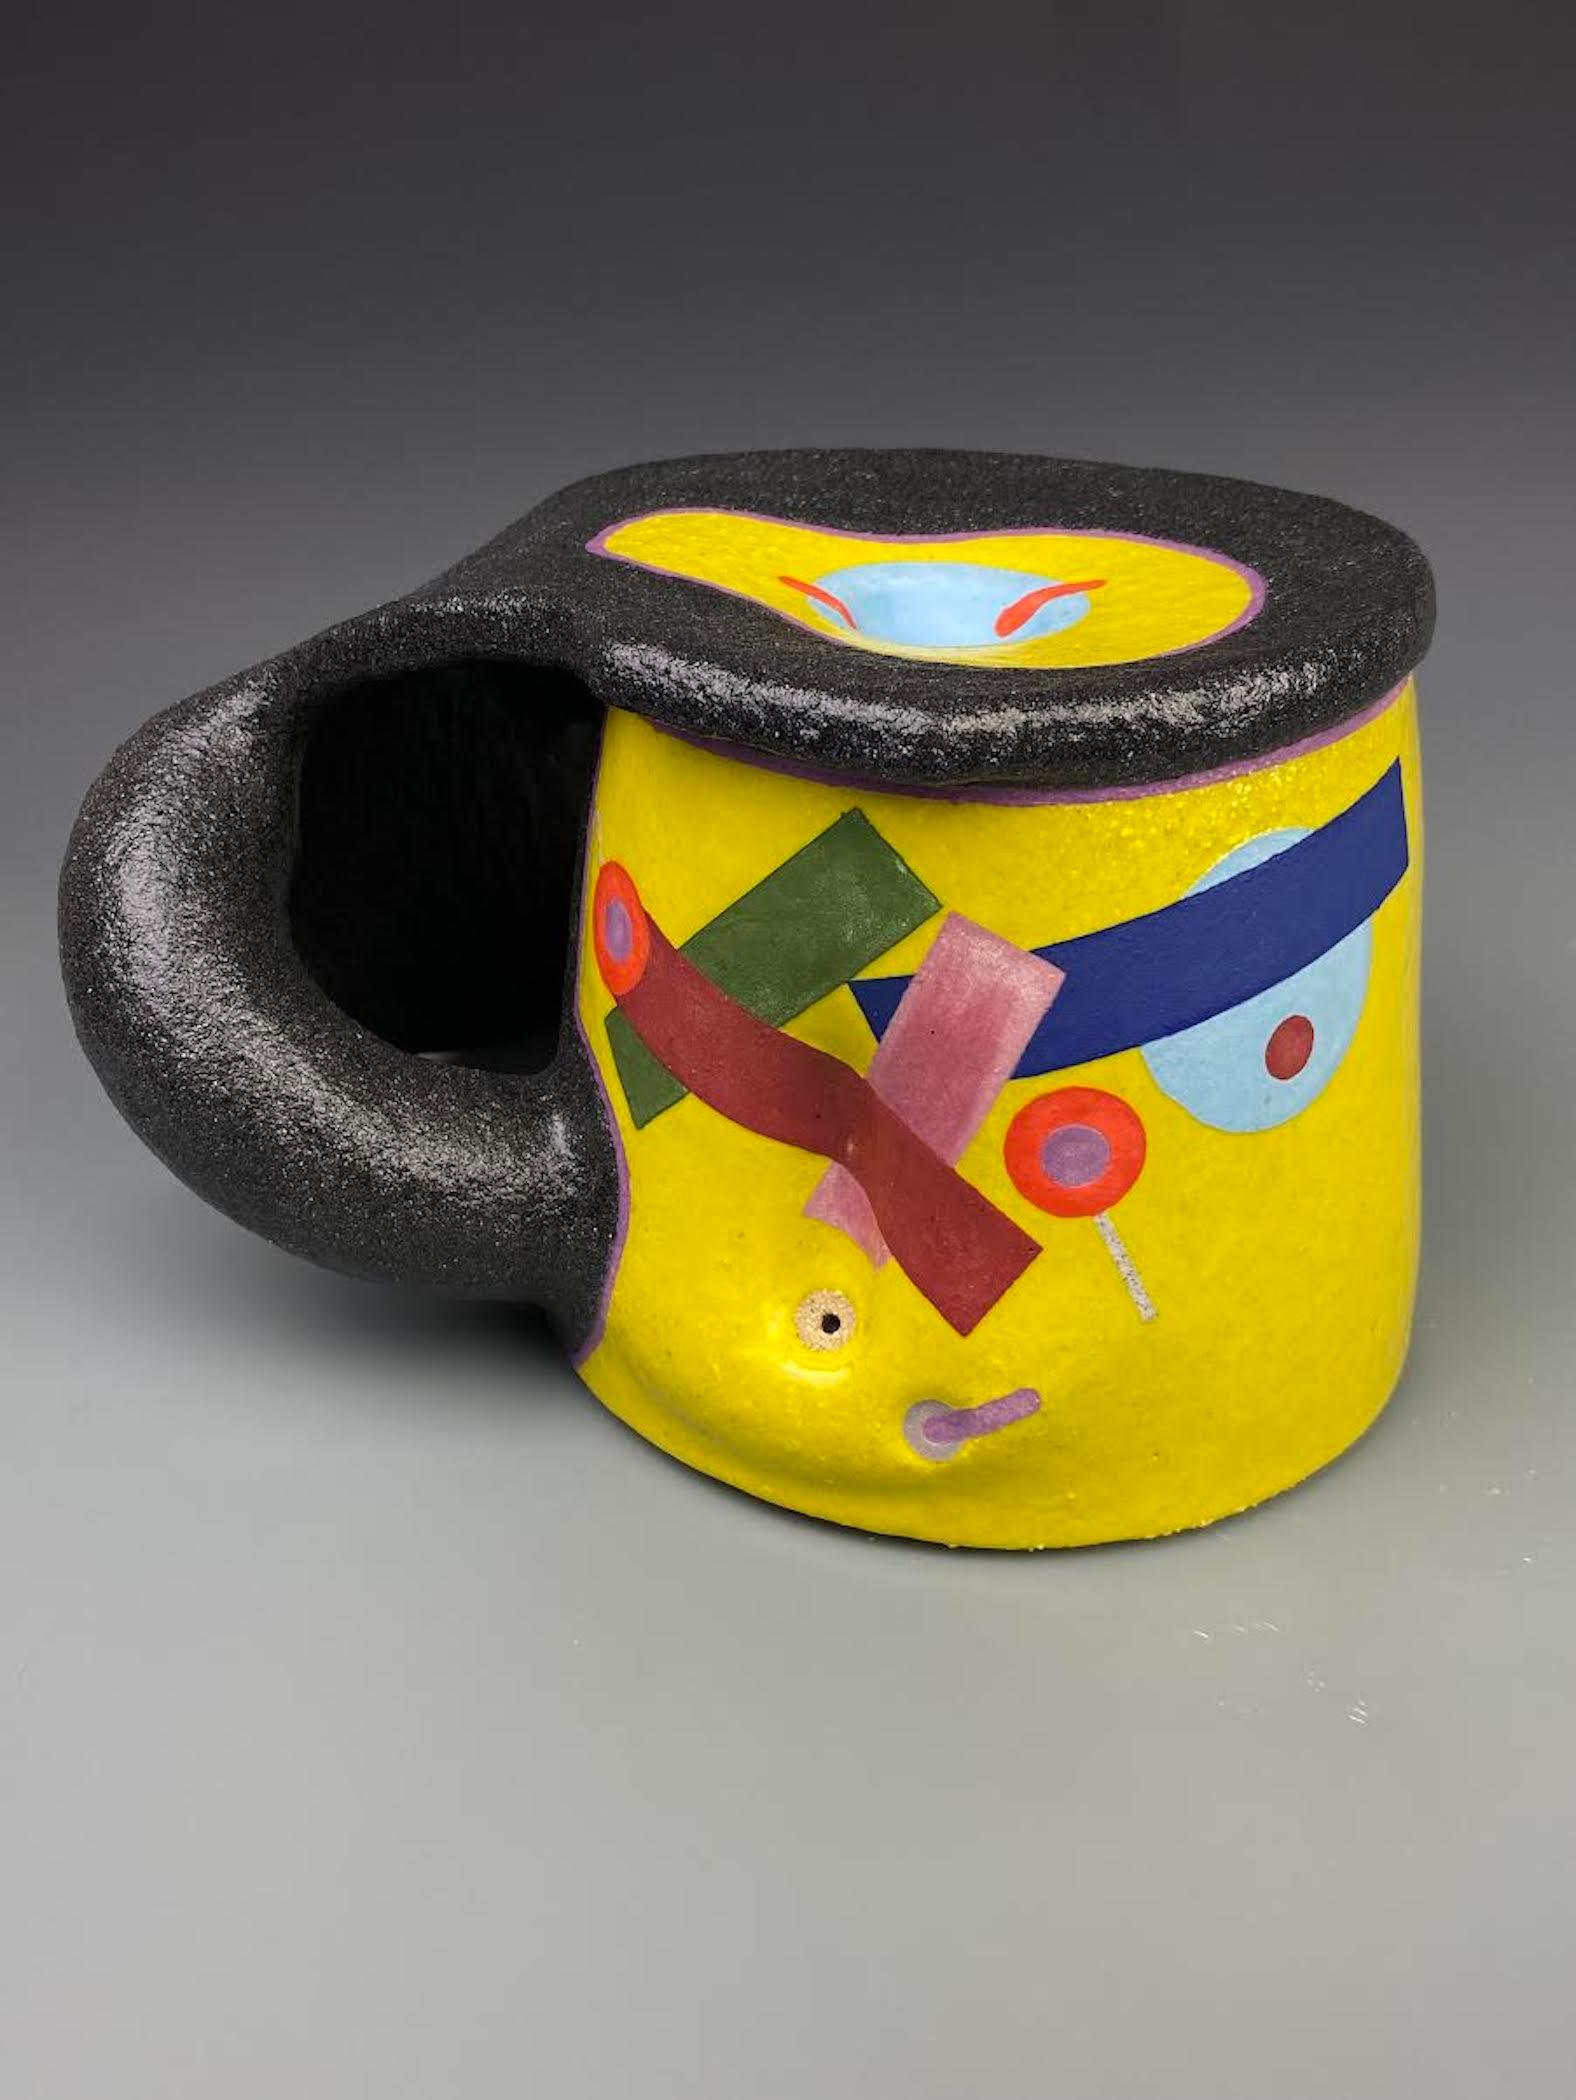 José Sierra Abstract Sculpture - "MD09", Contemporary, Abstract, Ceramic, Sculpture, Stoneware, Glaze, Colorful